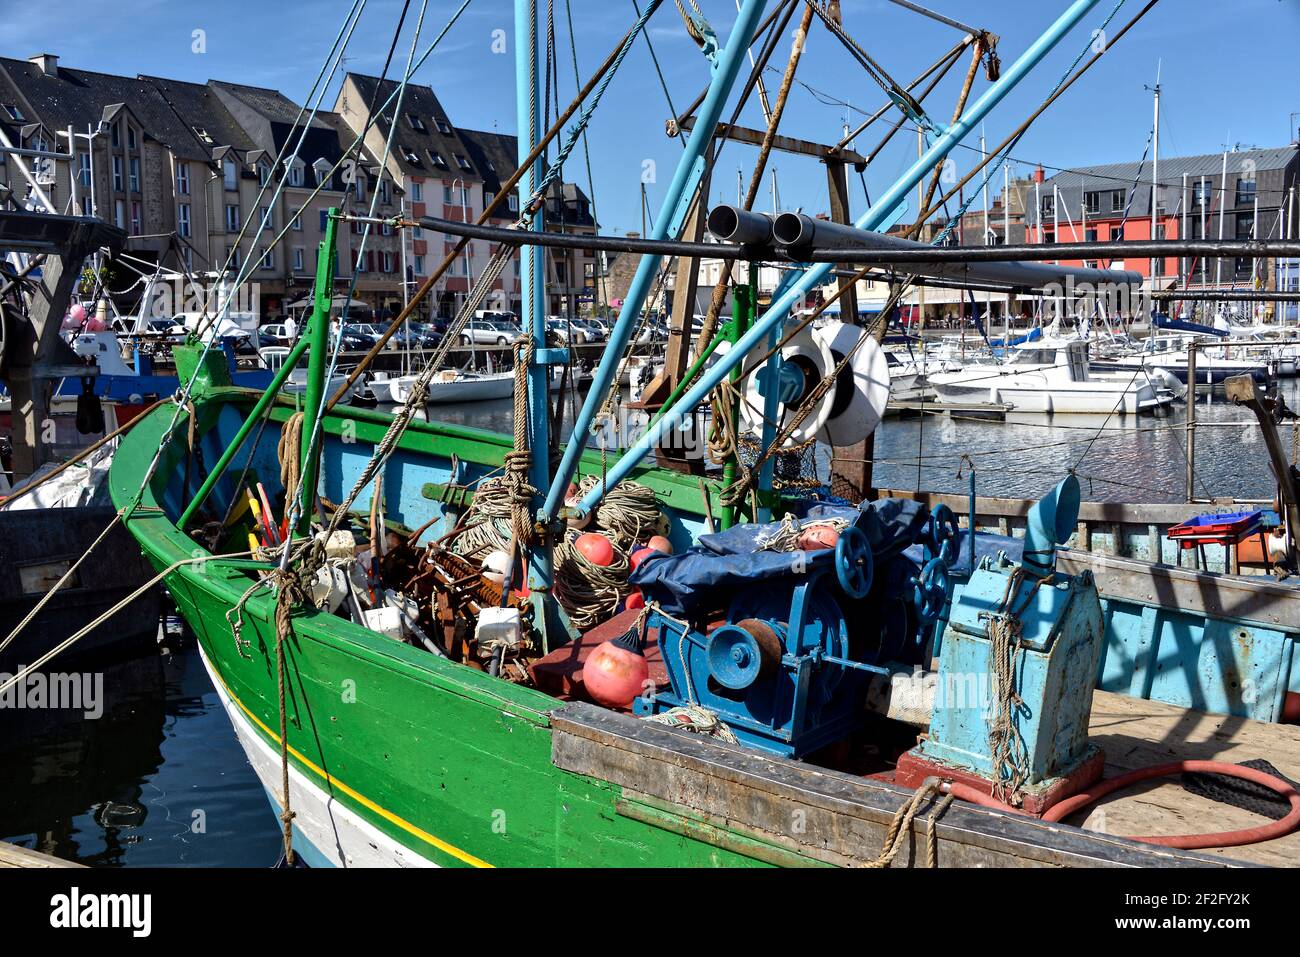 Fish boat in the port of Paimpol, a commune in the Côtes-d'Armor department in Brittany in northwestern France Stock Photo